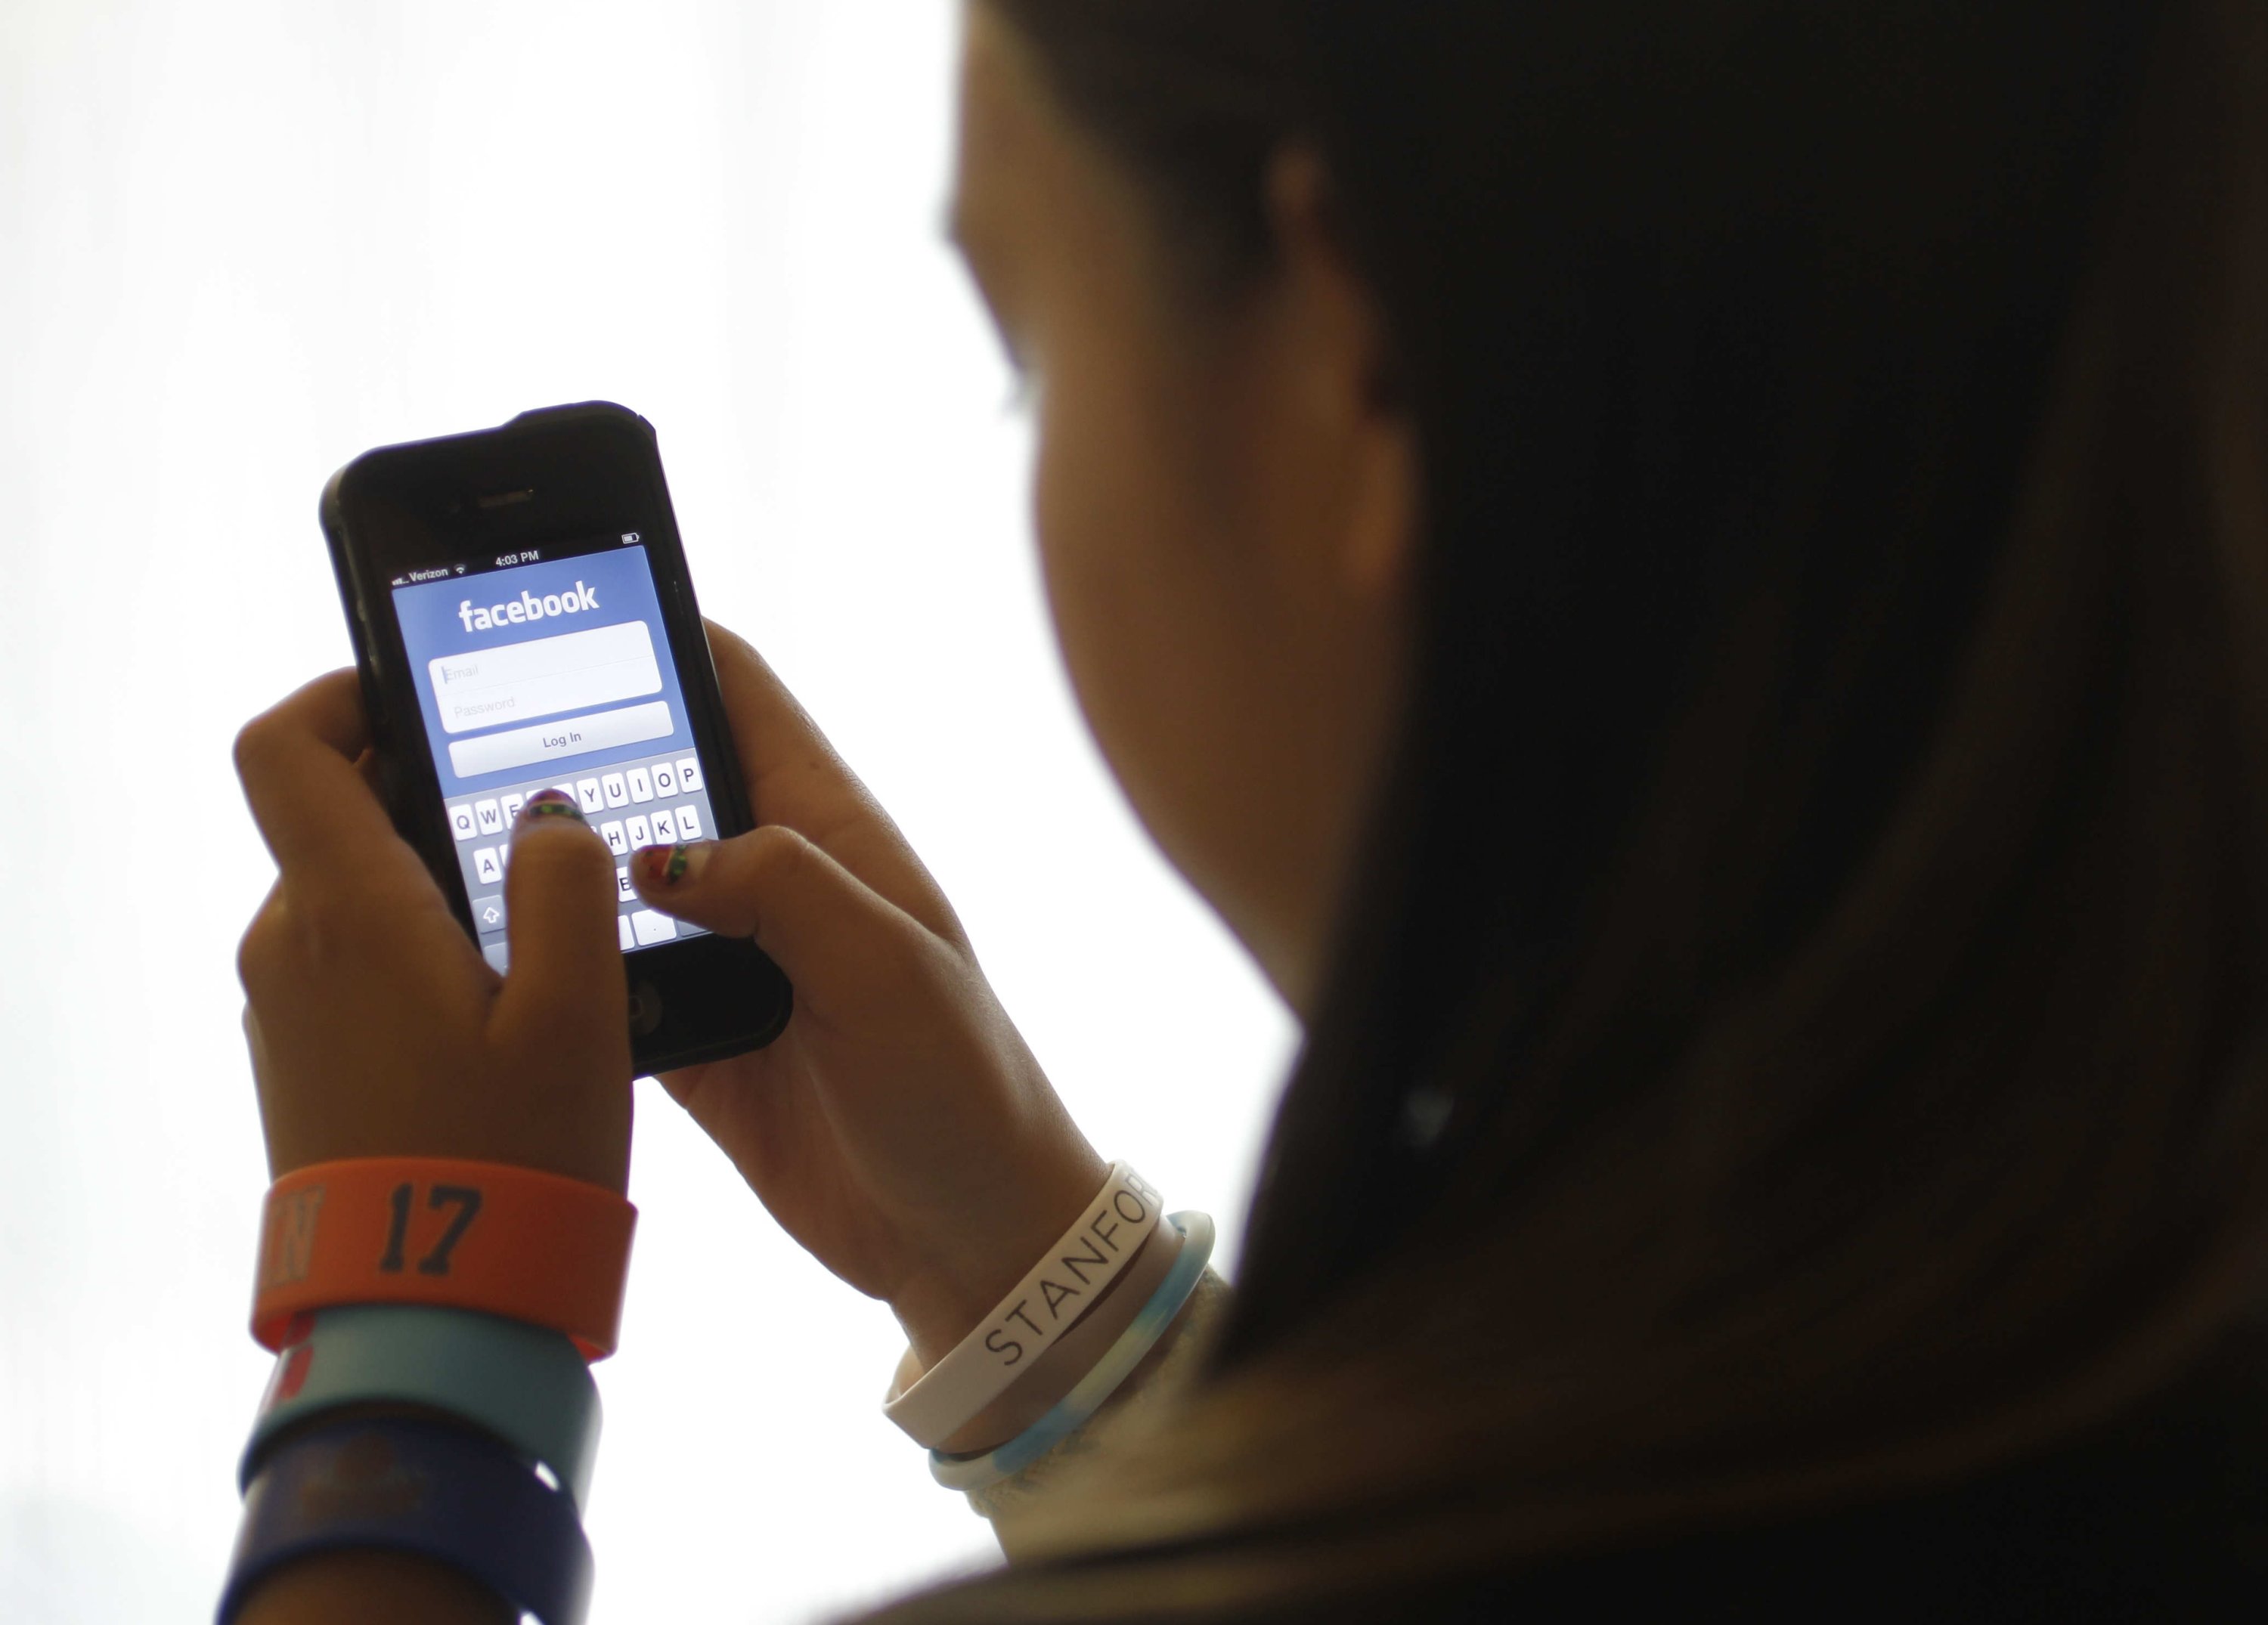 An unidentified 11-year-old girl logs into Facebook on her iPhone at her home in Palo Alto, California, U.S., June 4, 2012. (AP Photo)